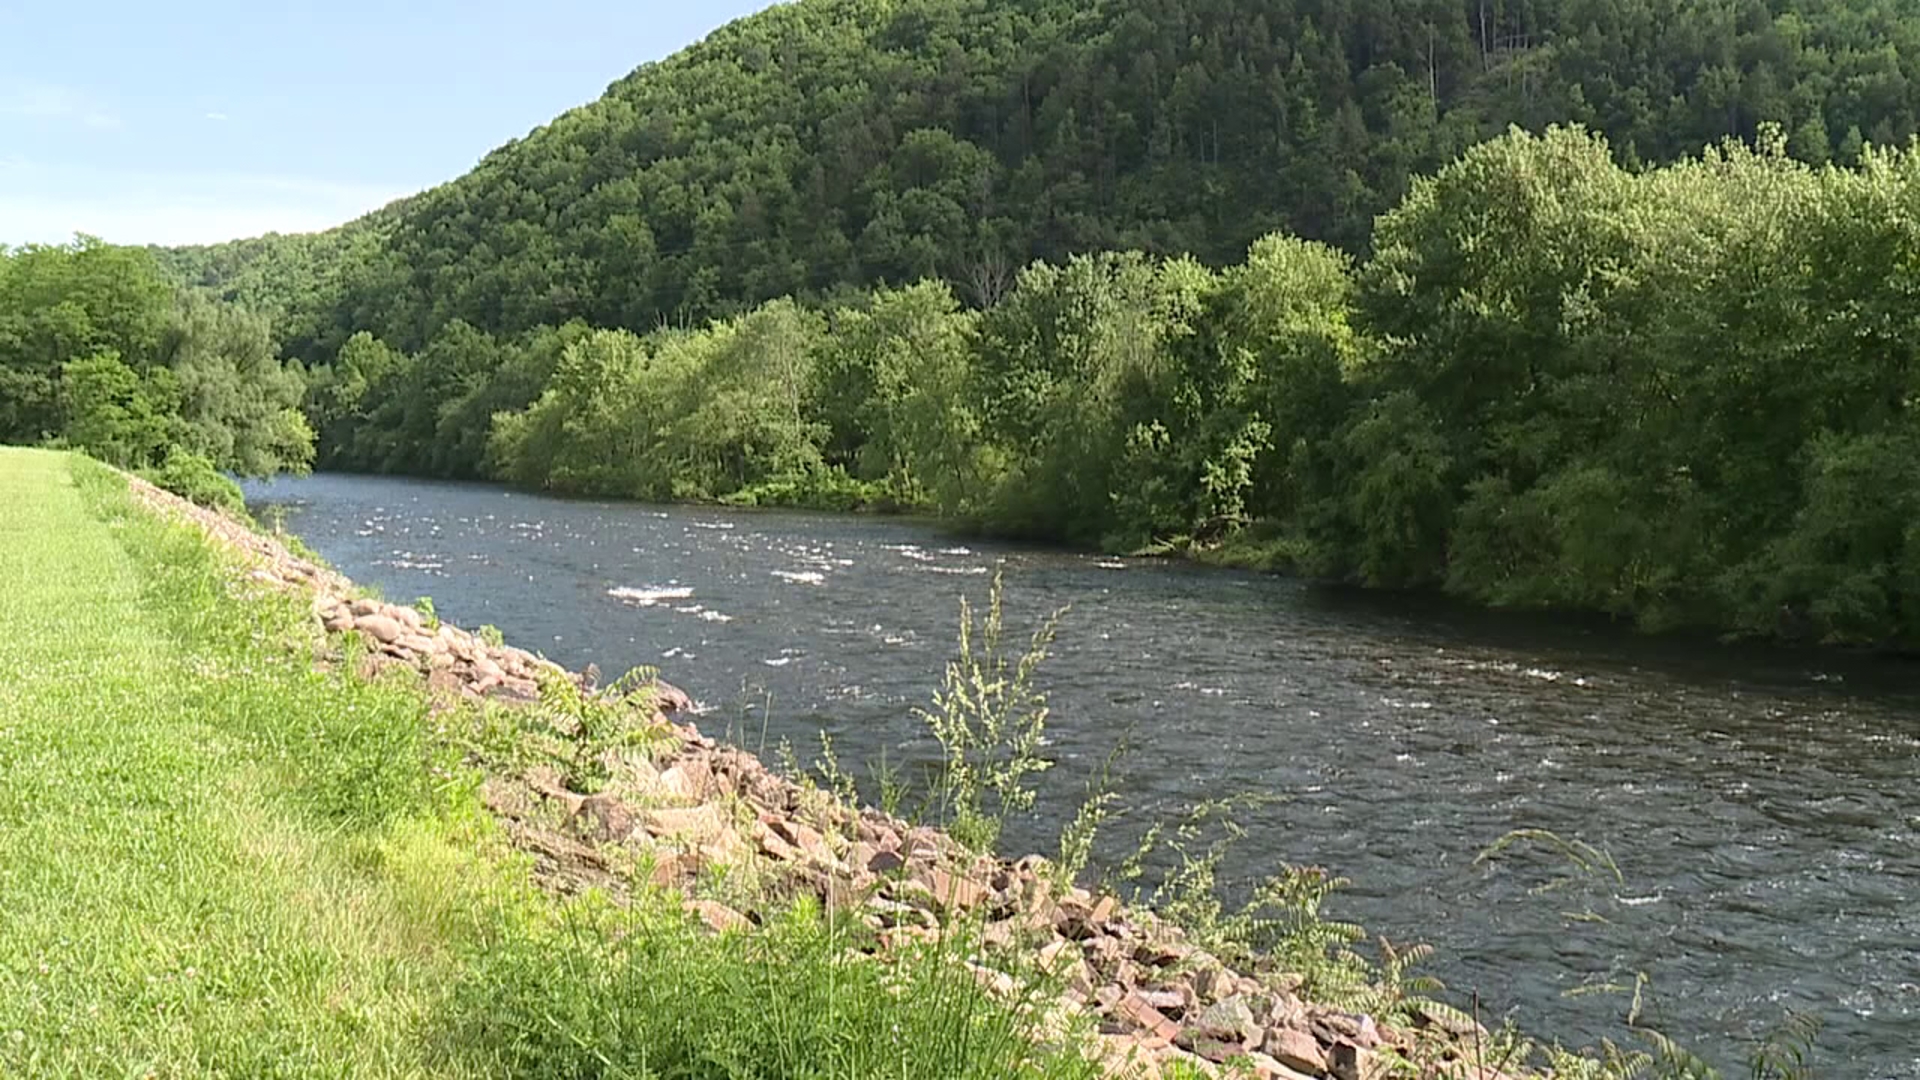 Dive teams from several agencies responded to part of the Lehigh River in Parryville Borough near Lehighton Saturday afternoon.